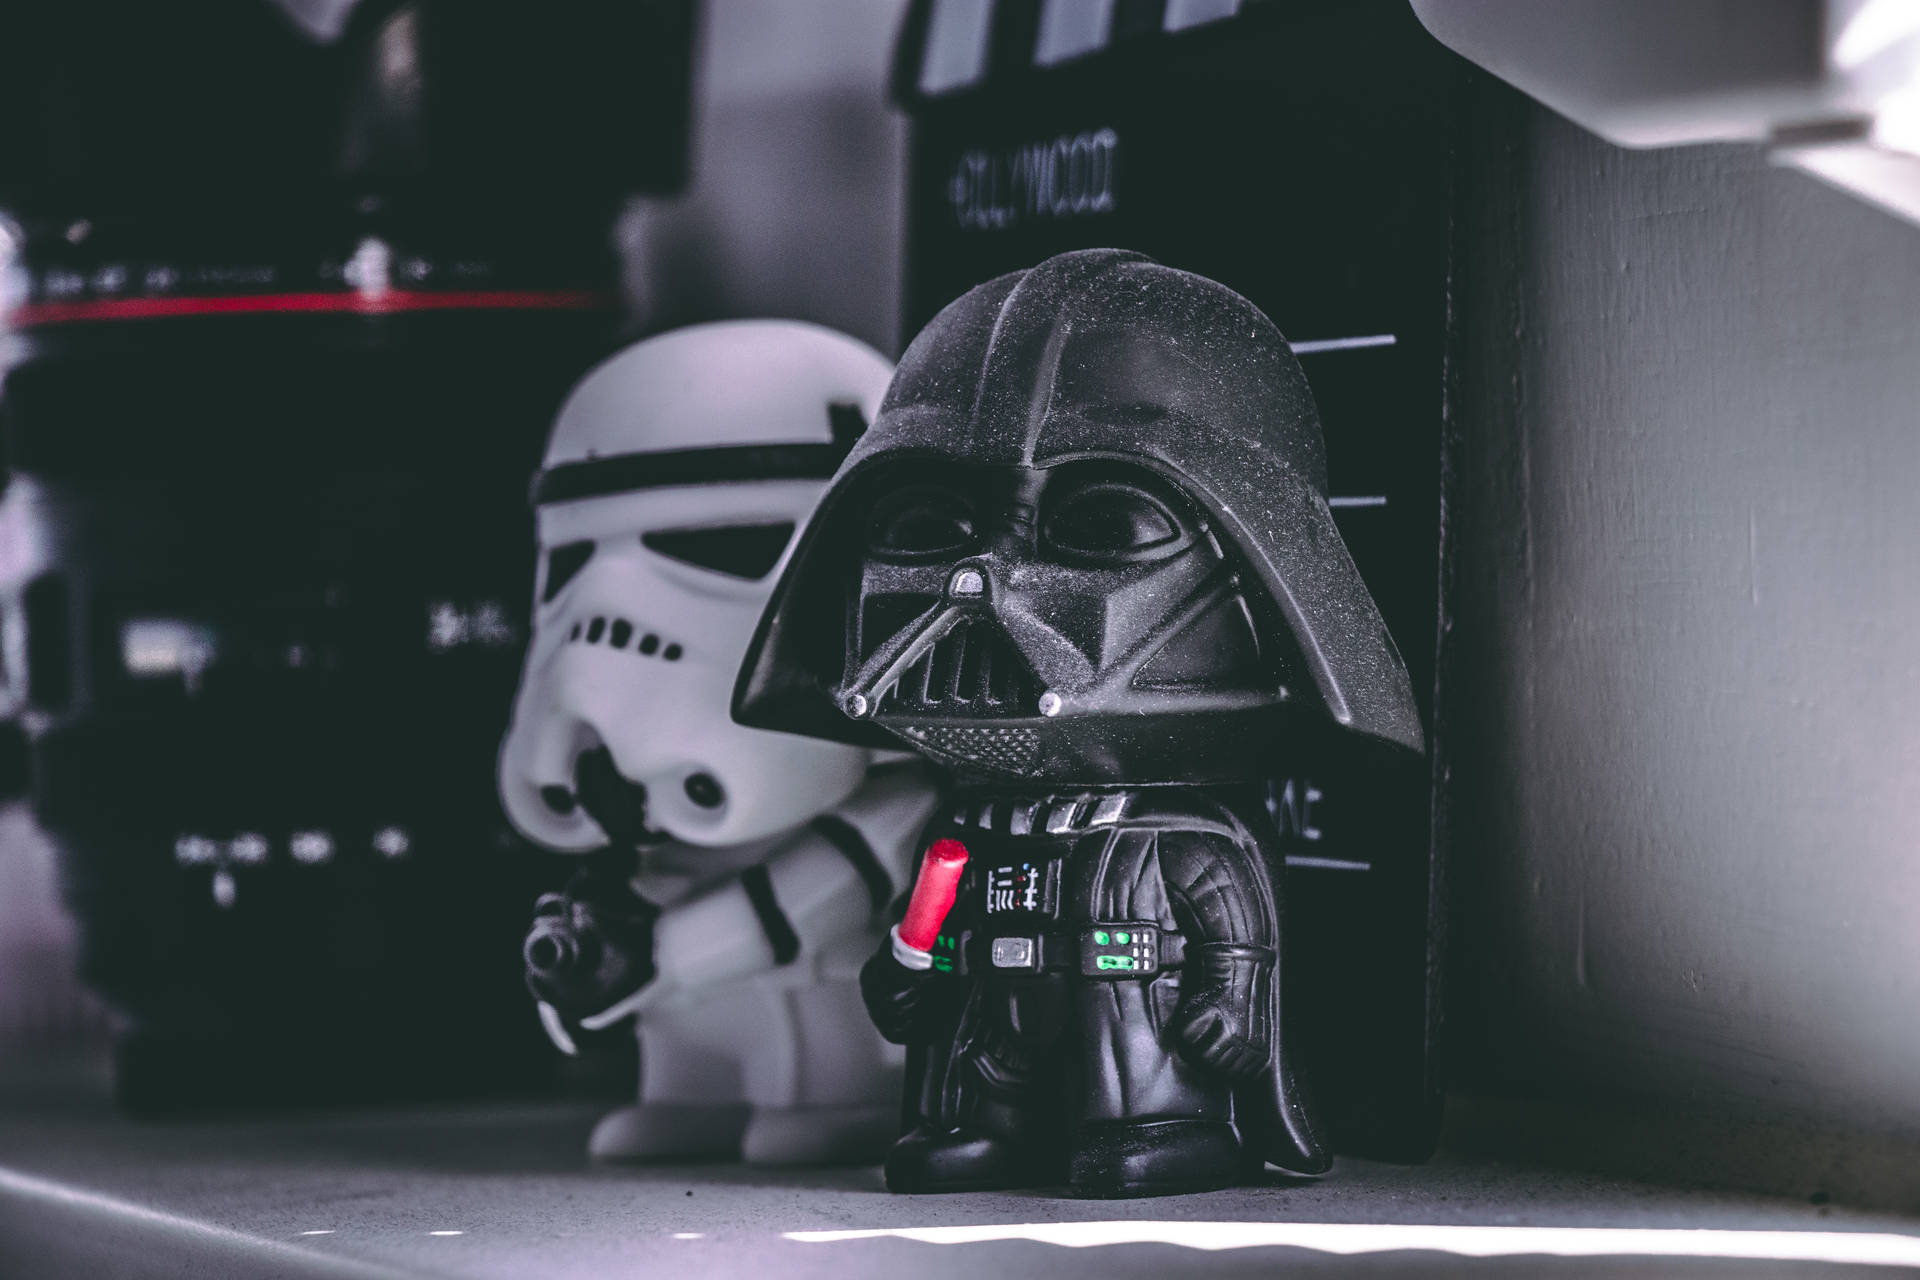 Star Wars Darth Vader And Imperial Stormtrooper Toy